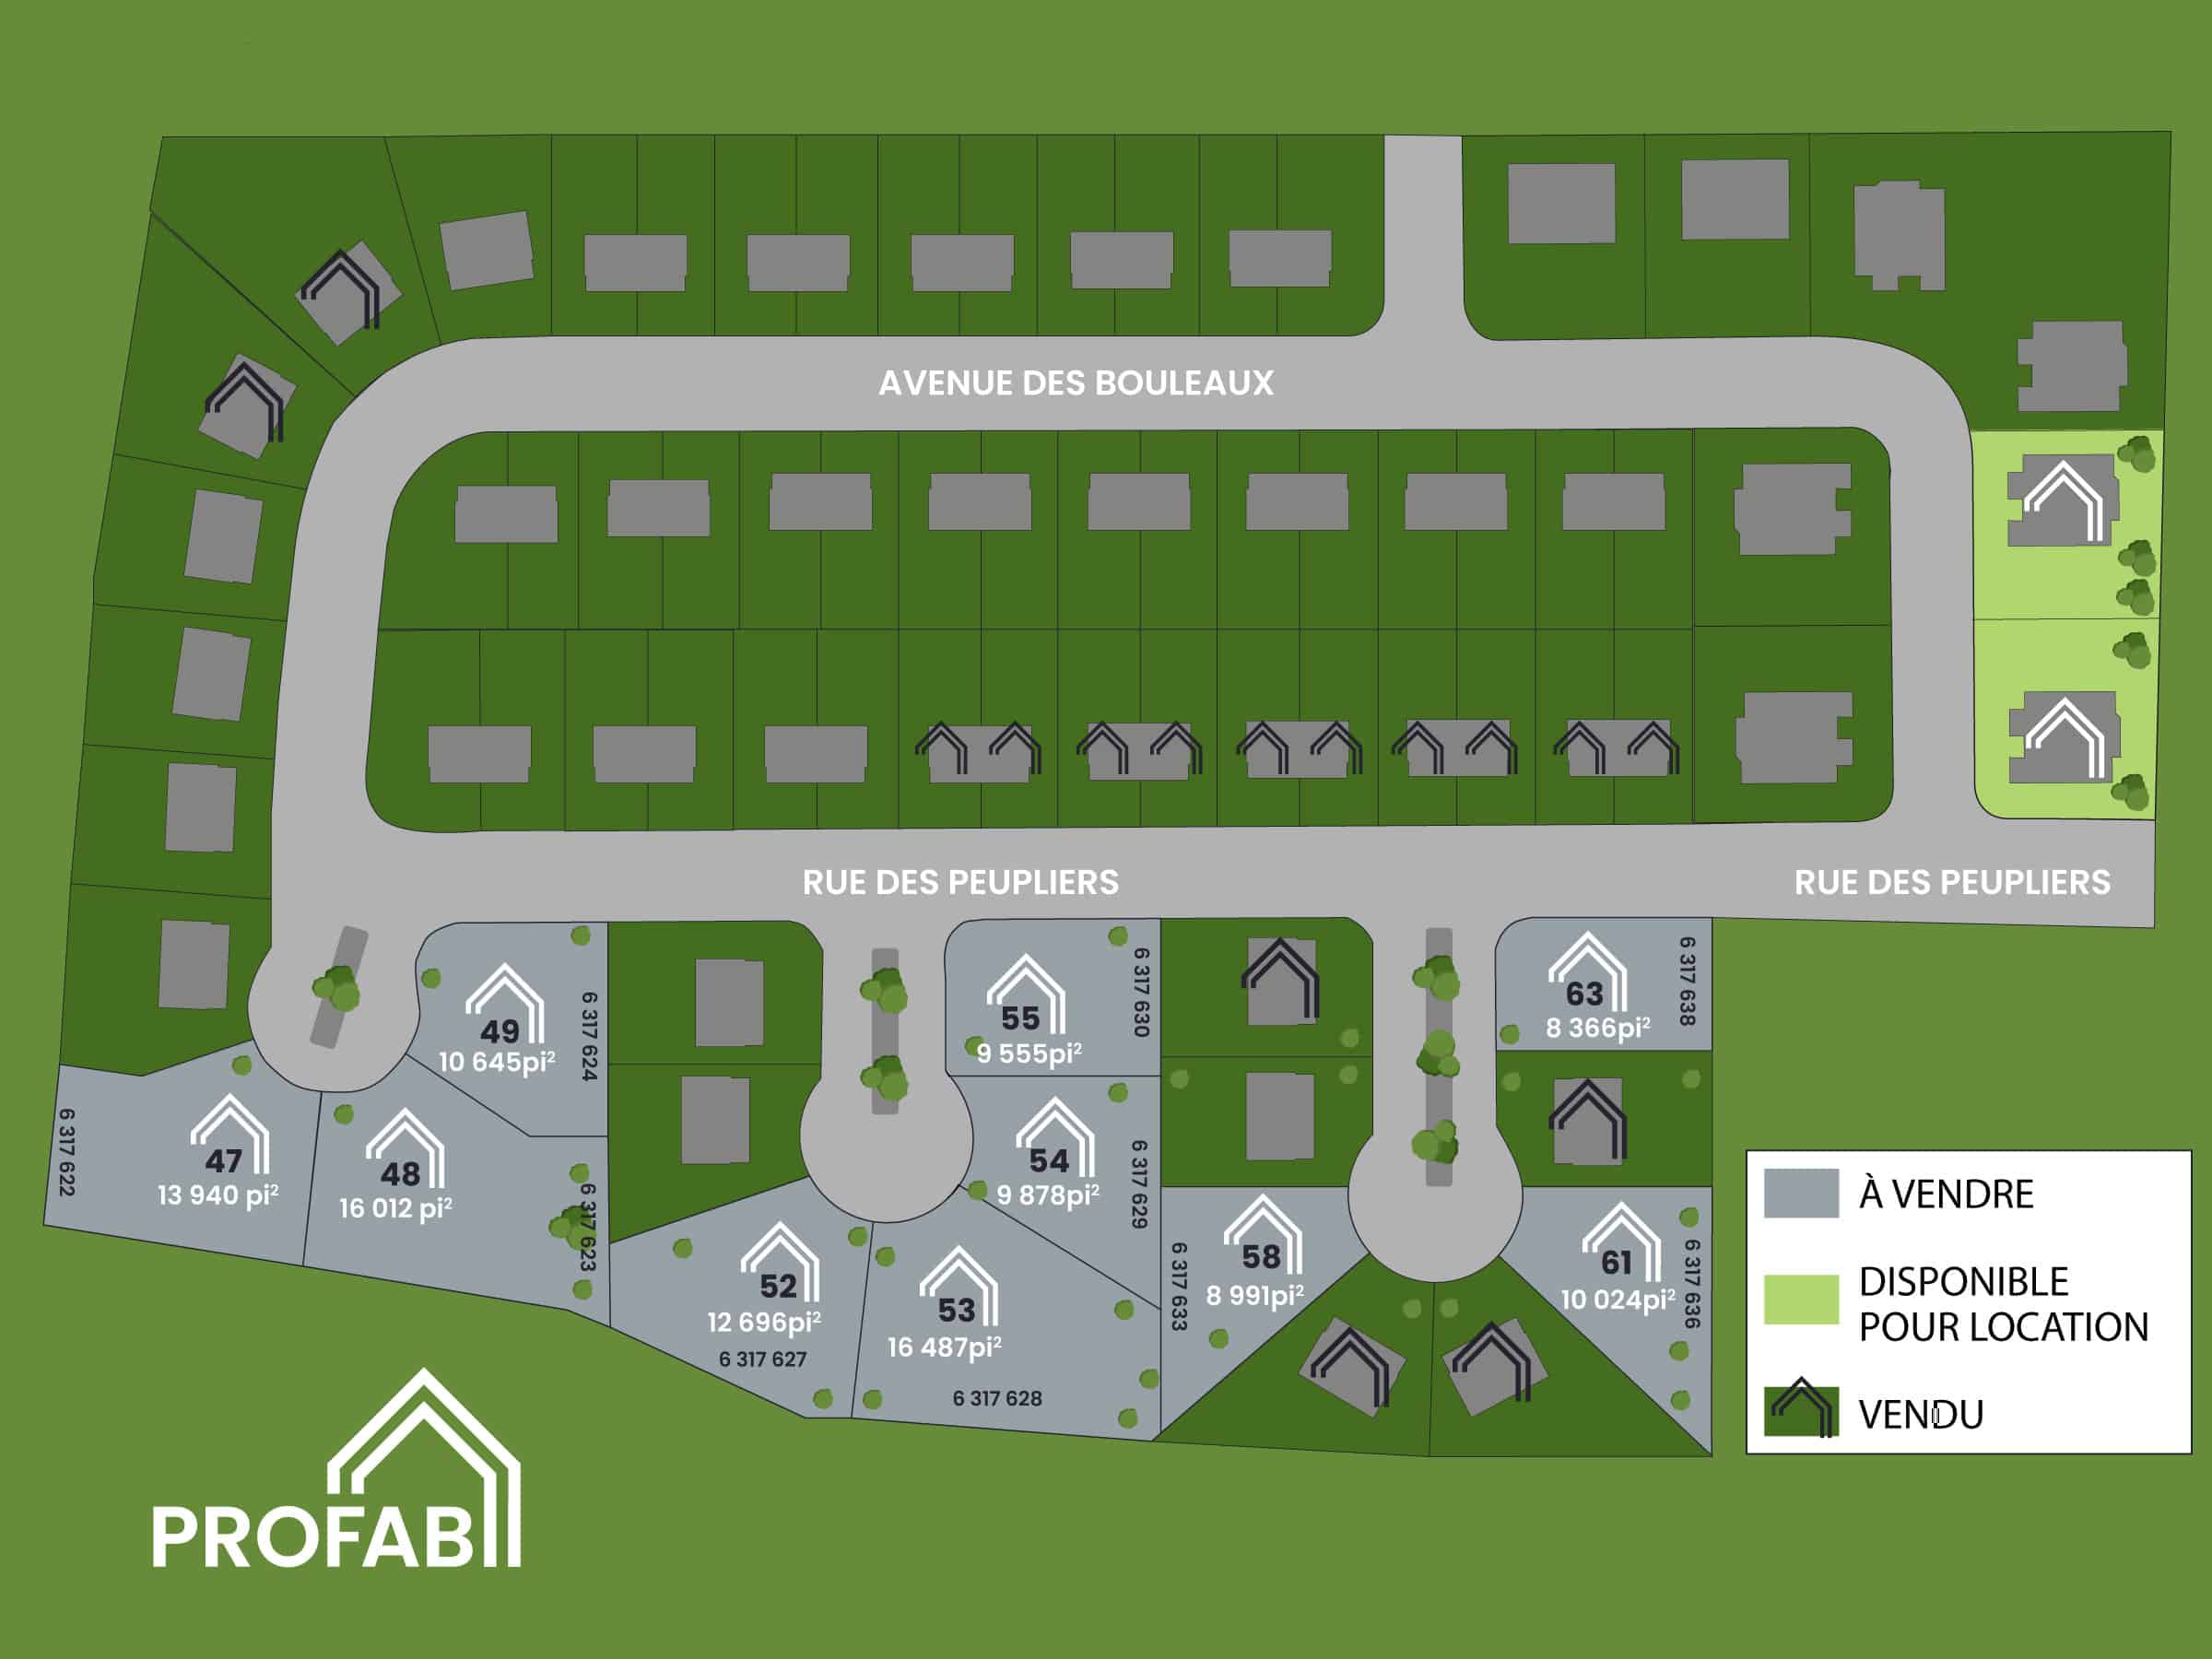 Vallée jonction 2D subdivision plan. Vacant lot number 52 for sale.